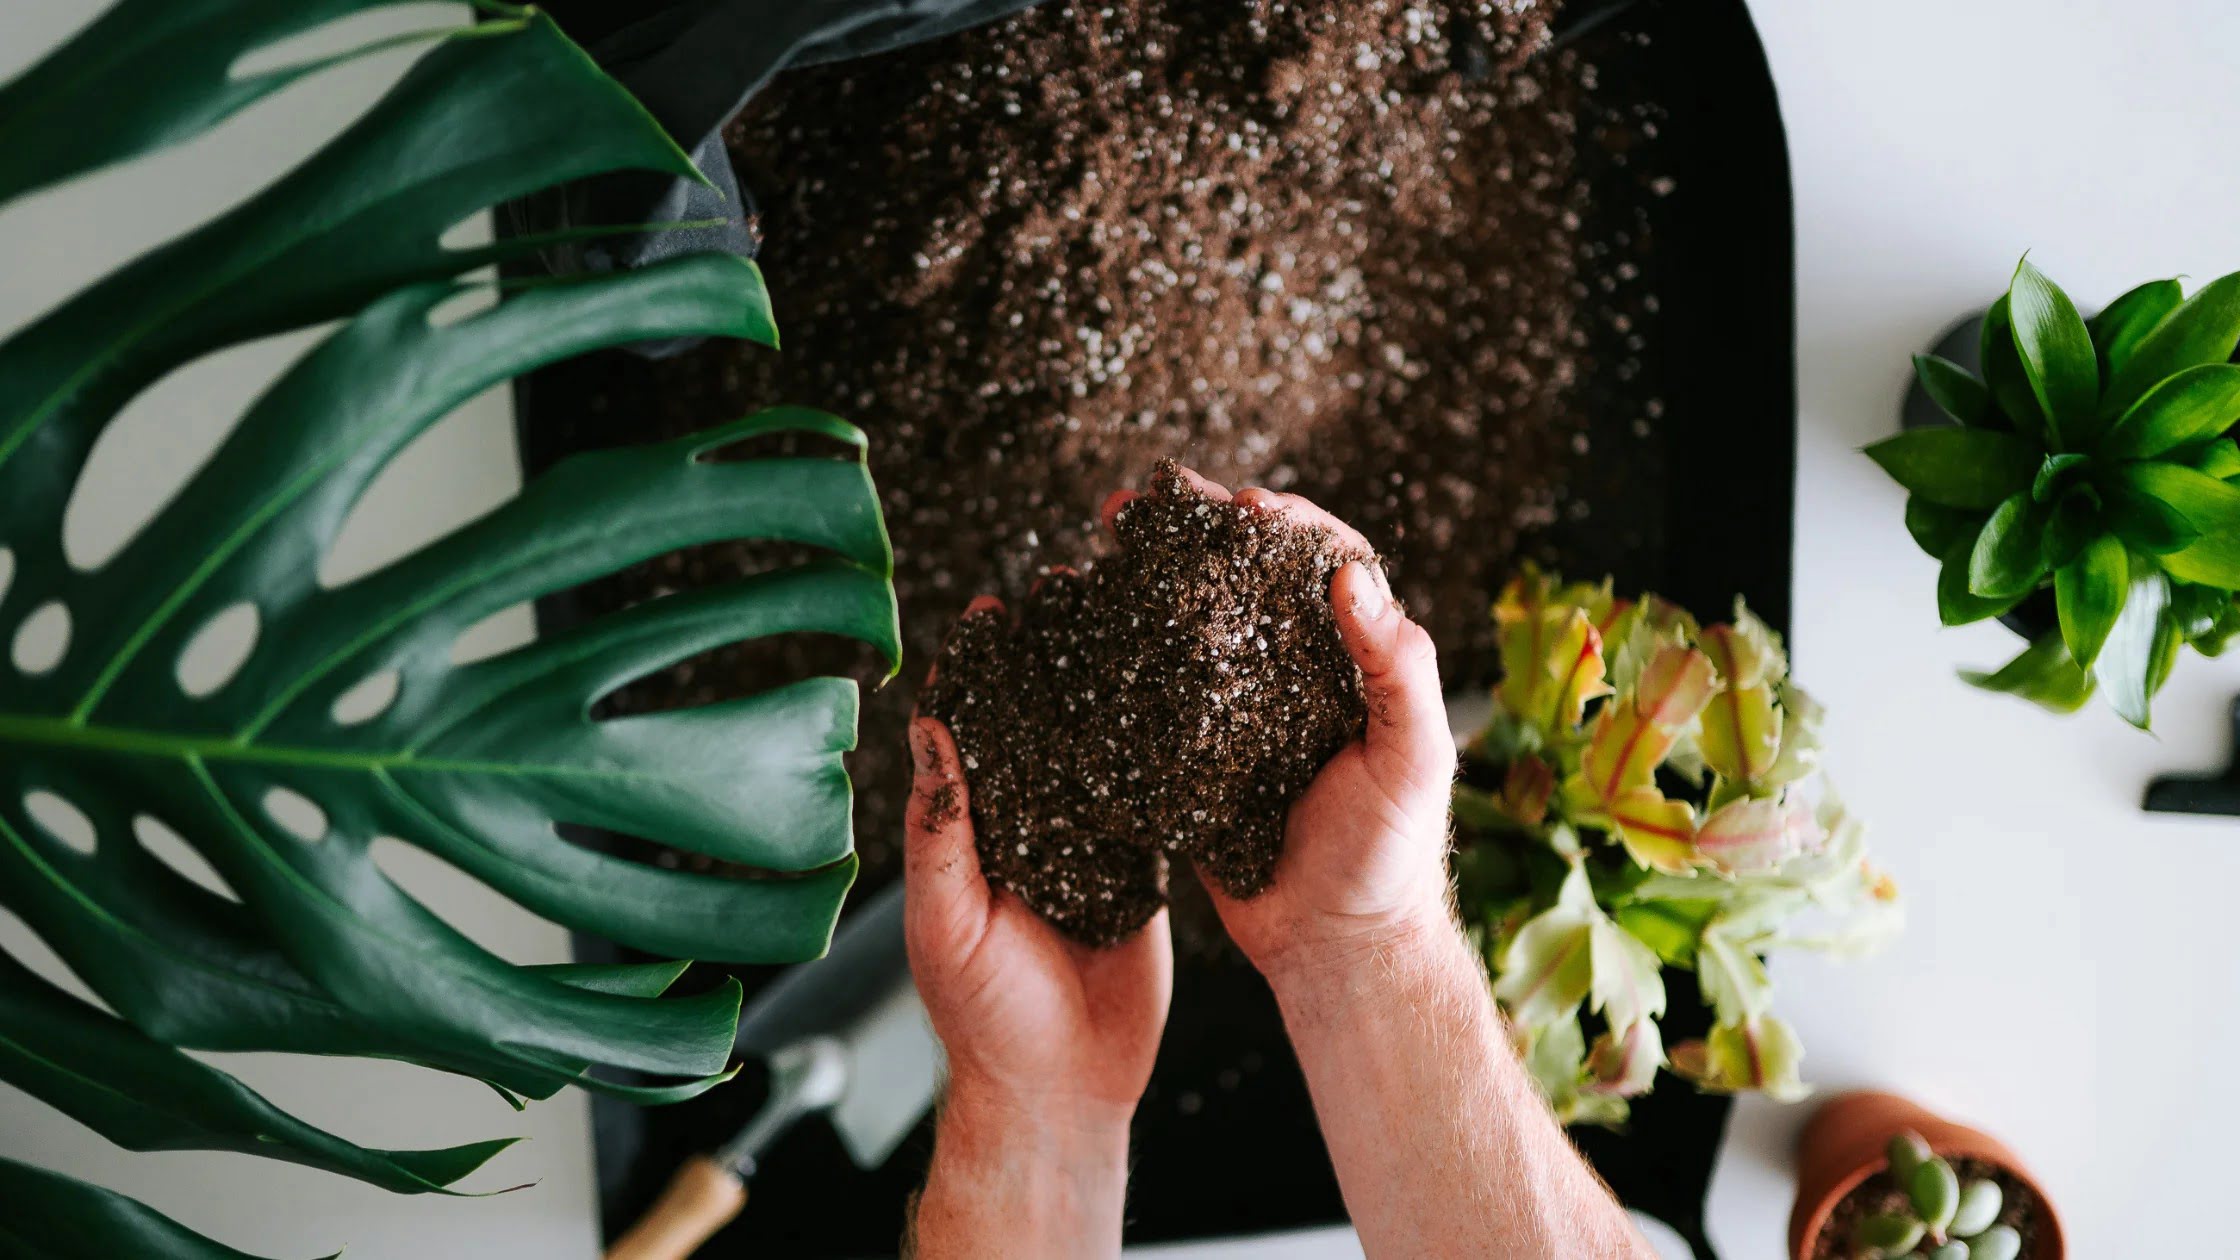 What Is A Good Soil Mix For Indoor Plants